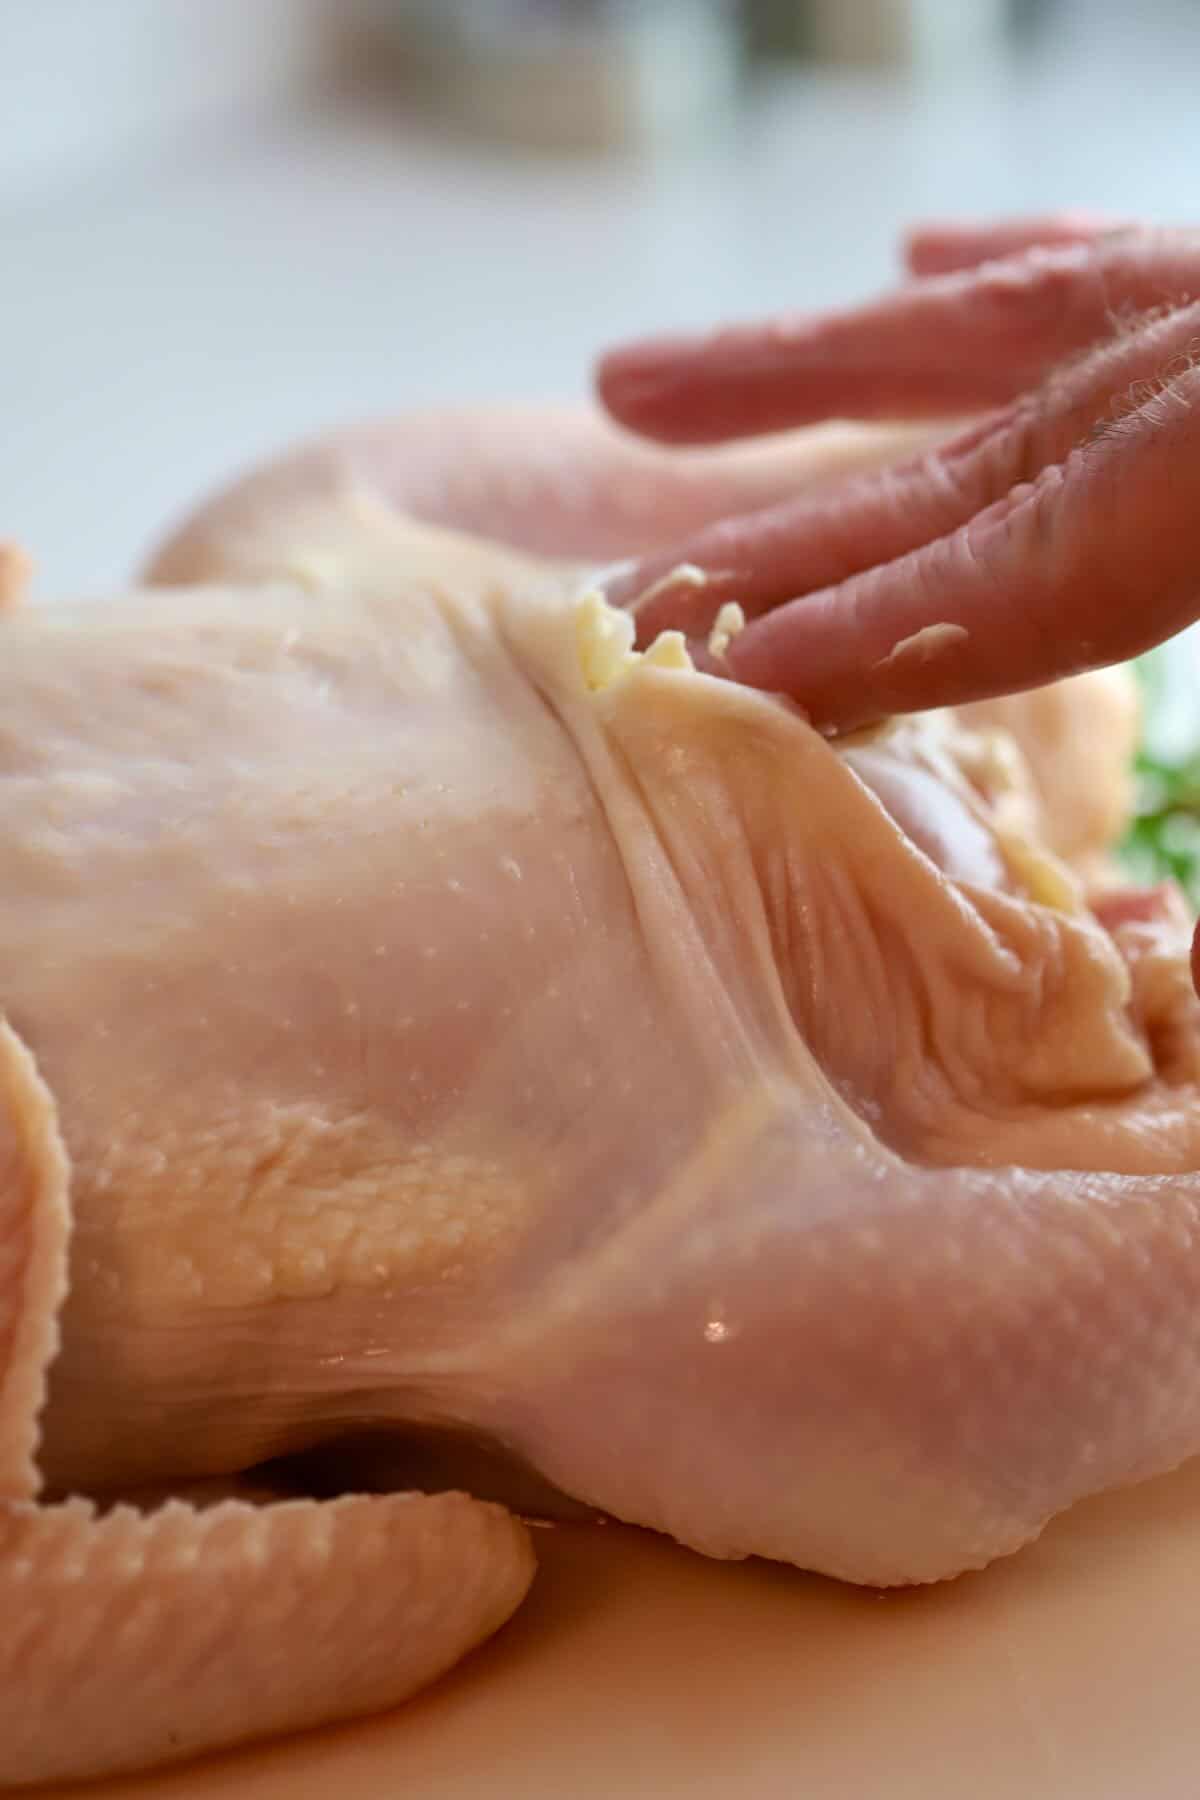 Spreading softened butter over an uncooked whole chicken using fingers. 